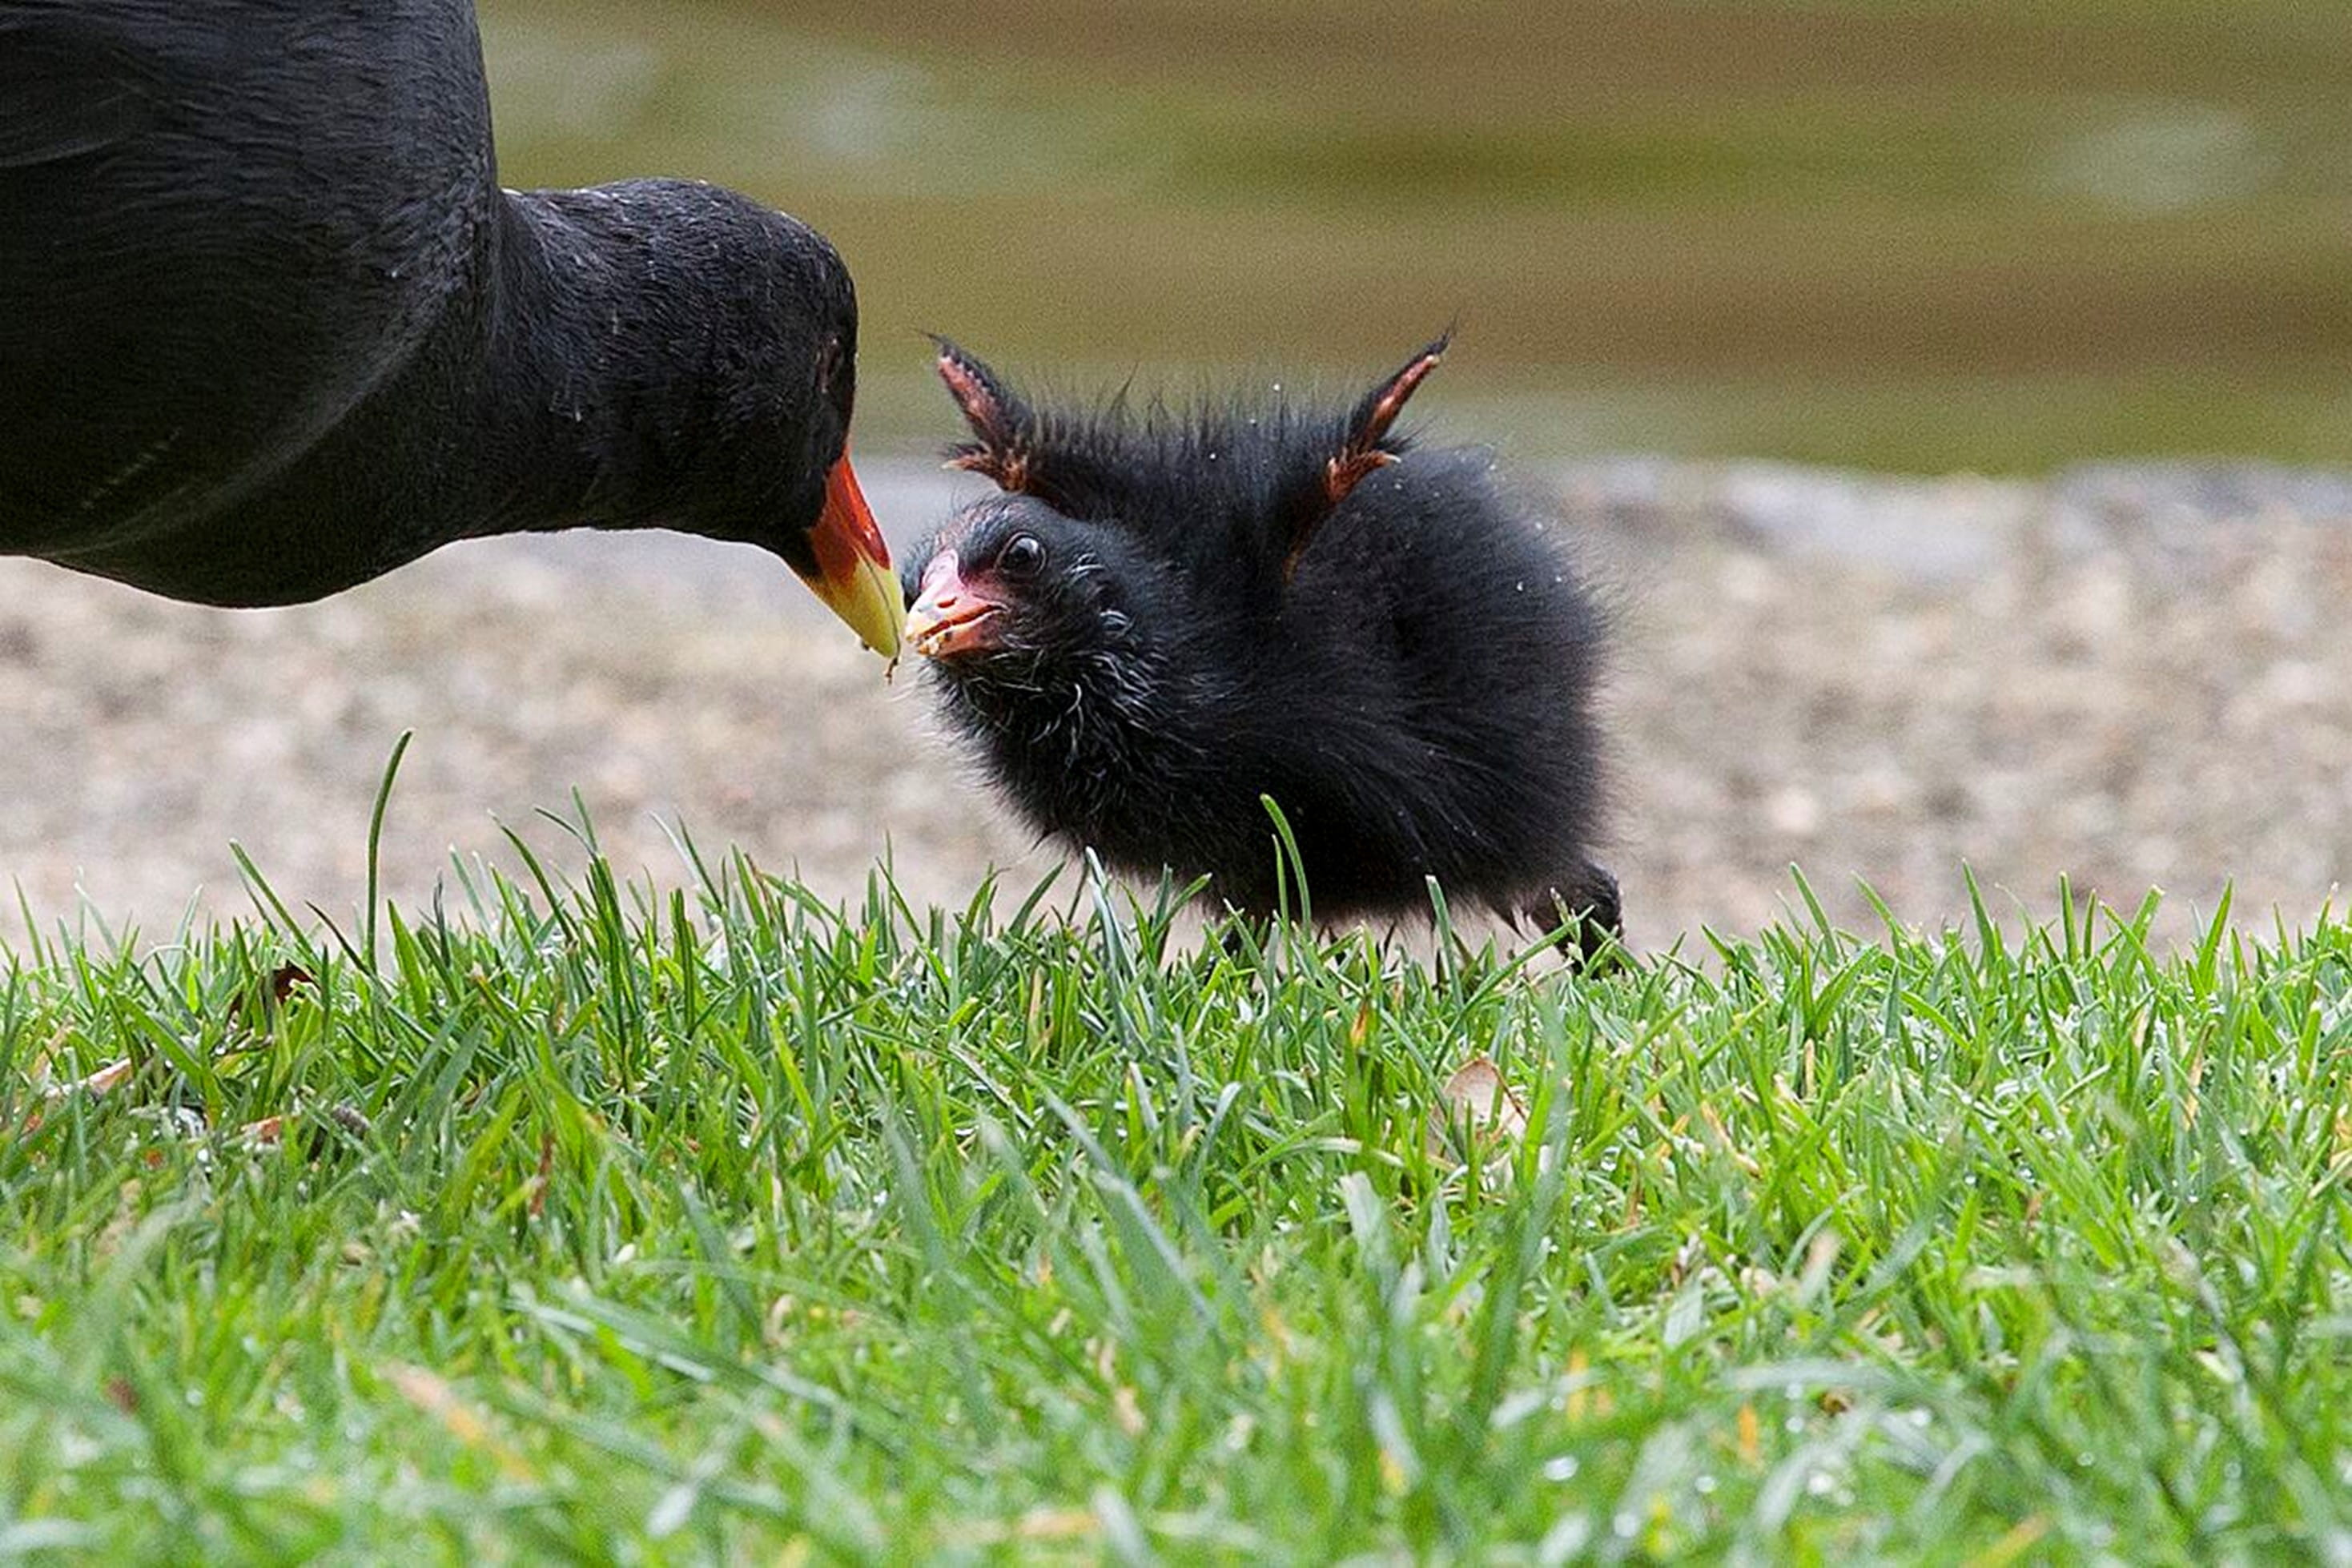 A hideous chick is asking for its mother as it stands on the green grass. The parents head is bowed towards the chick. 